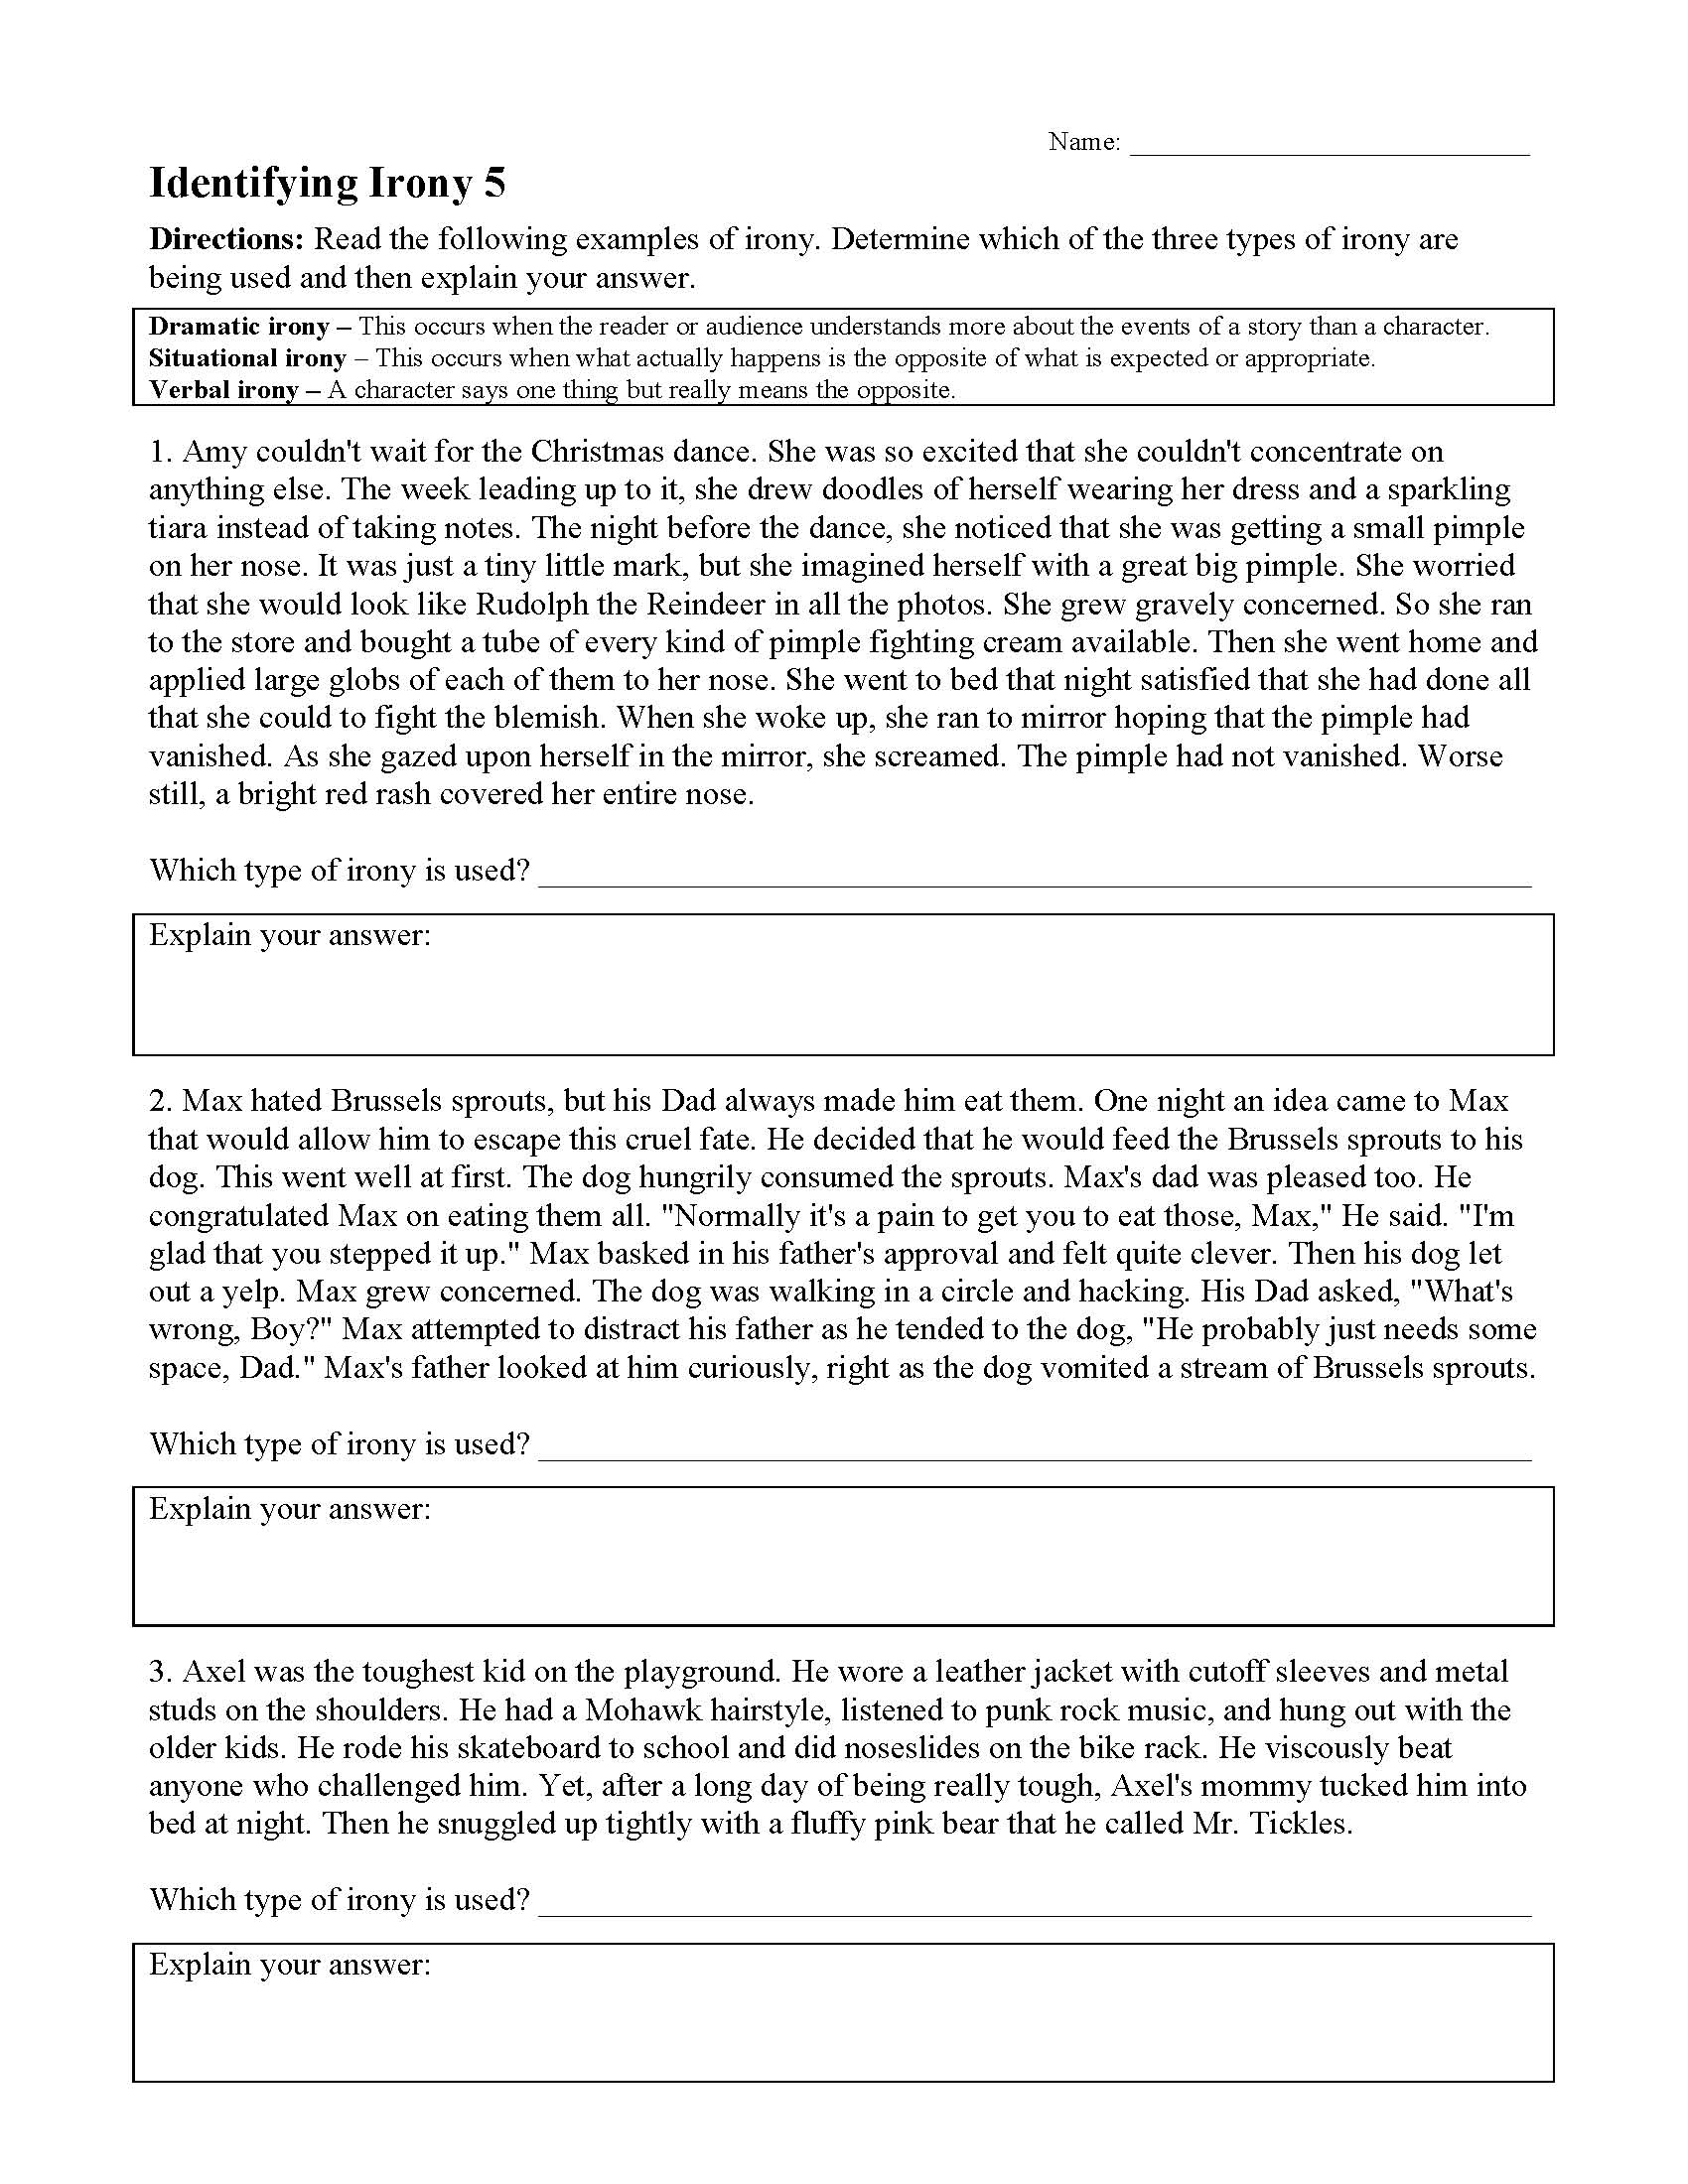 irony-worksheet-5-preview